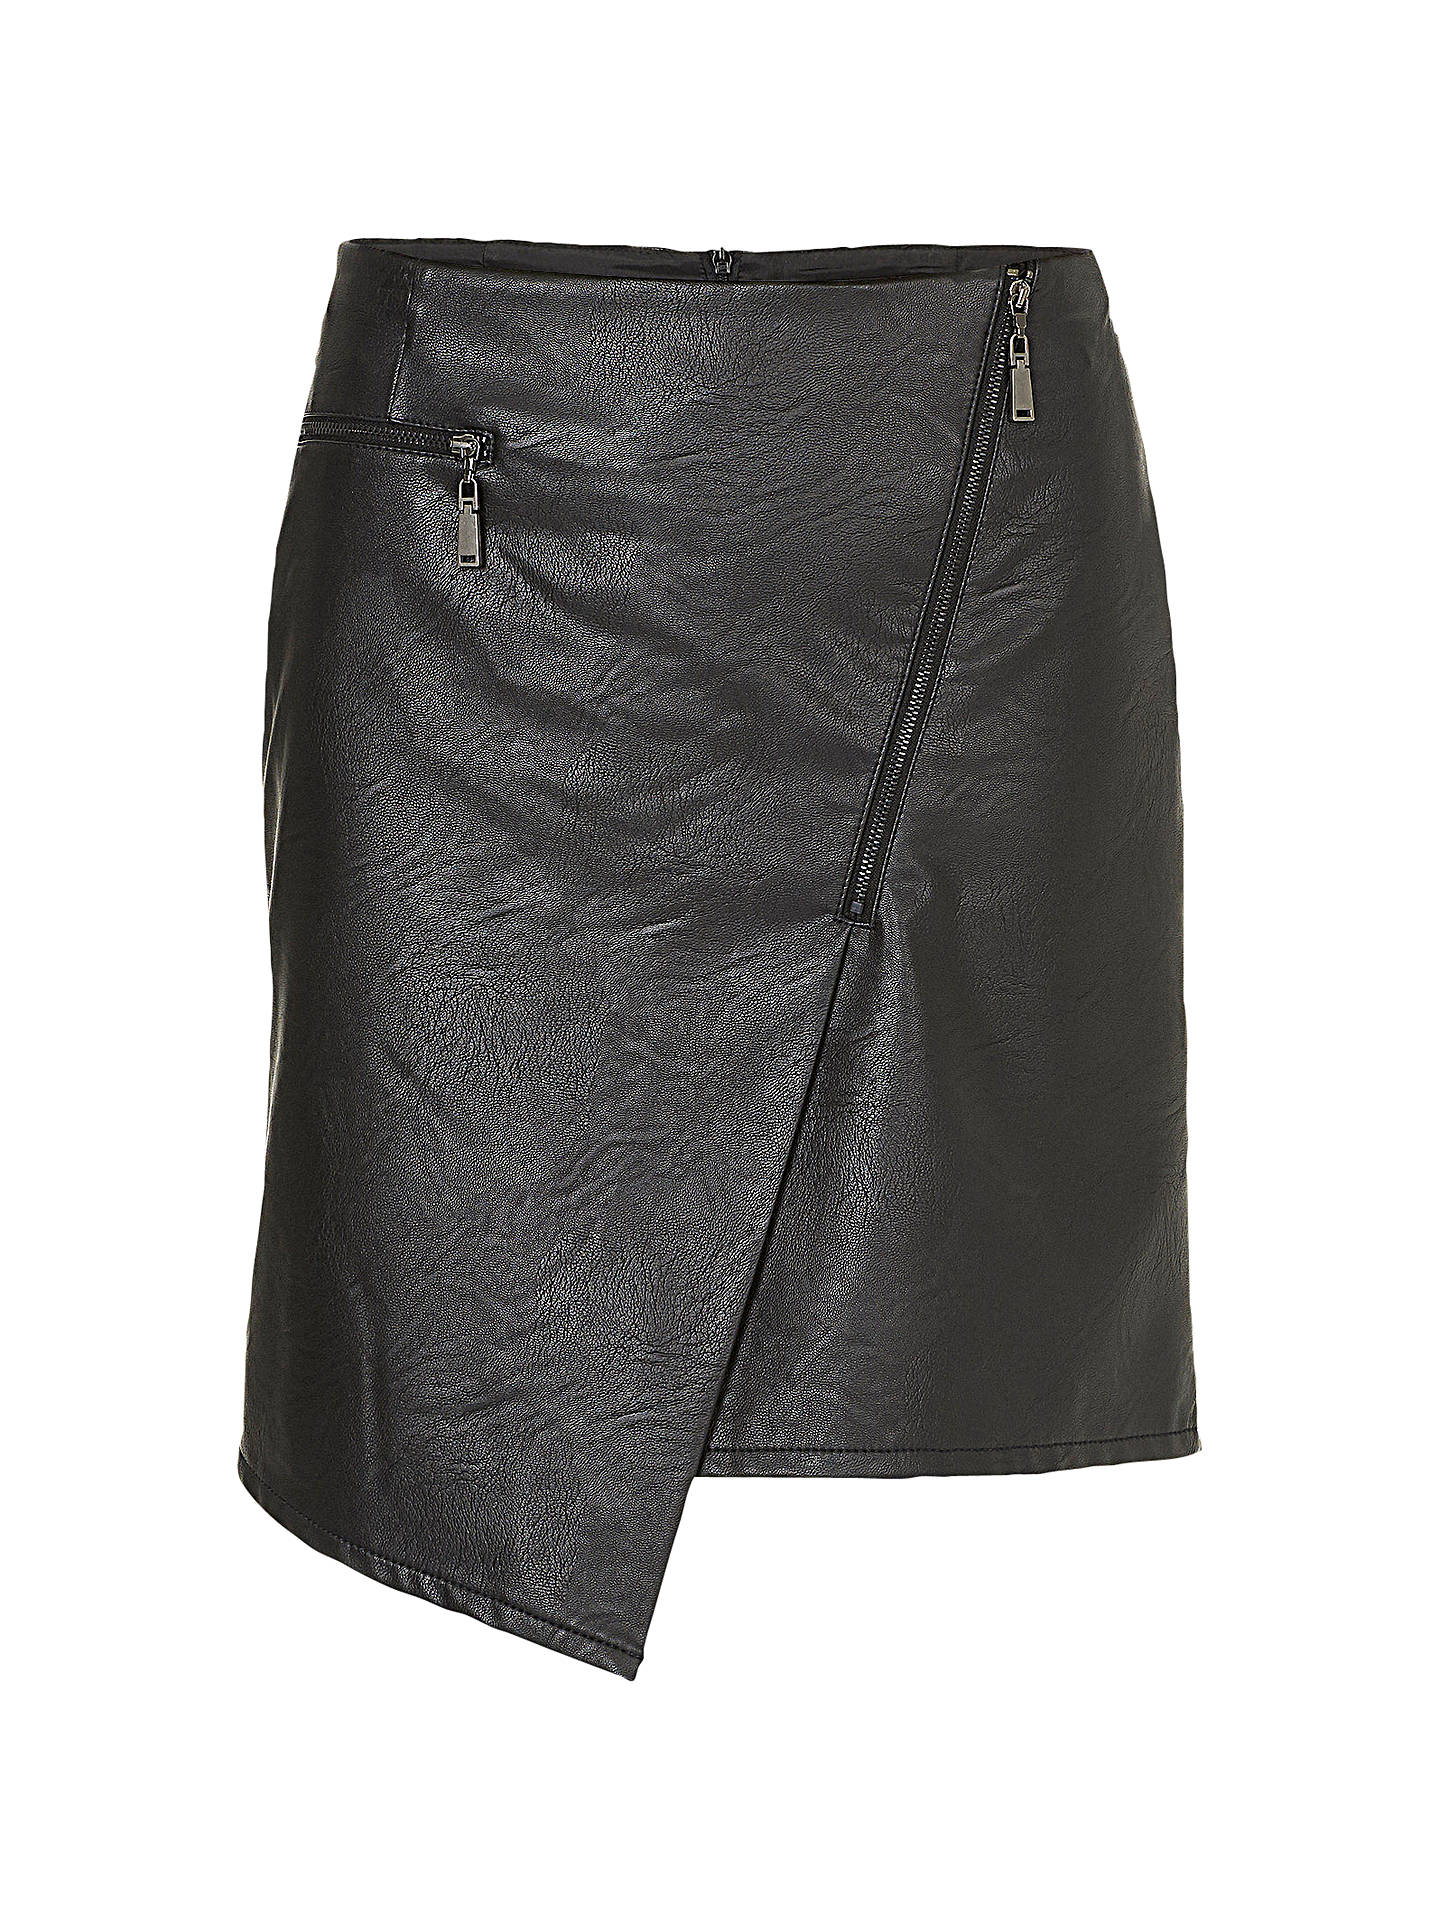 Betty Barclay Faux Leather Assymetrical Skirt at John Lewis & Partners